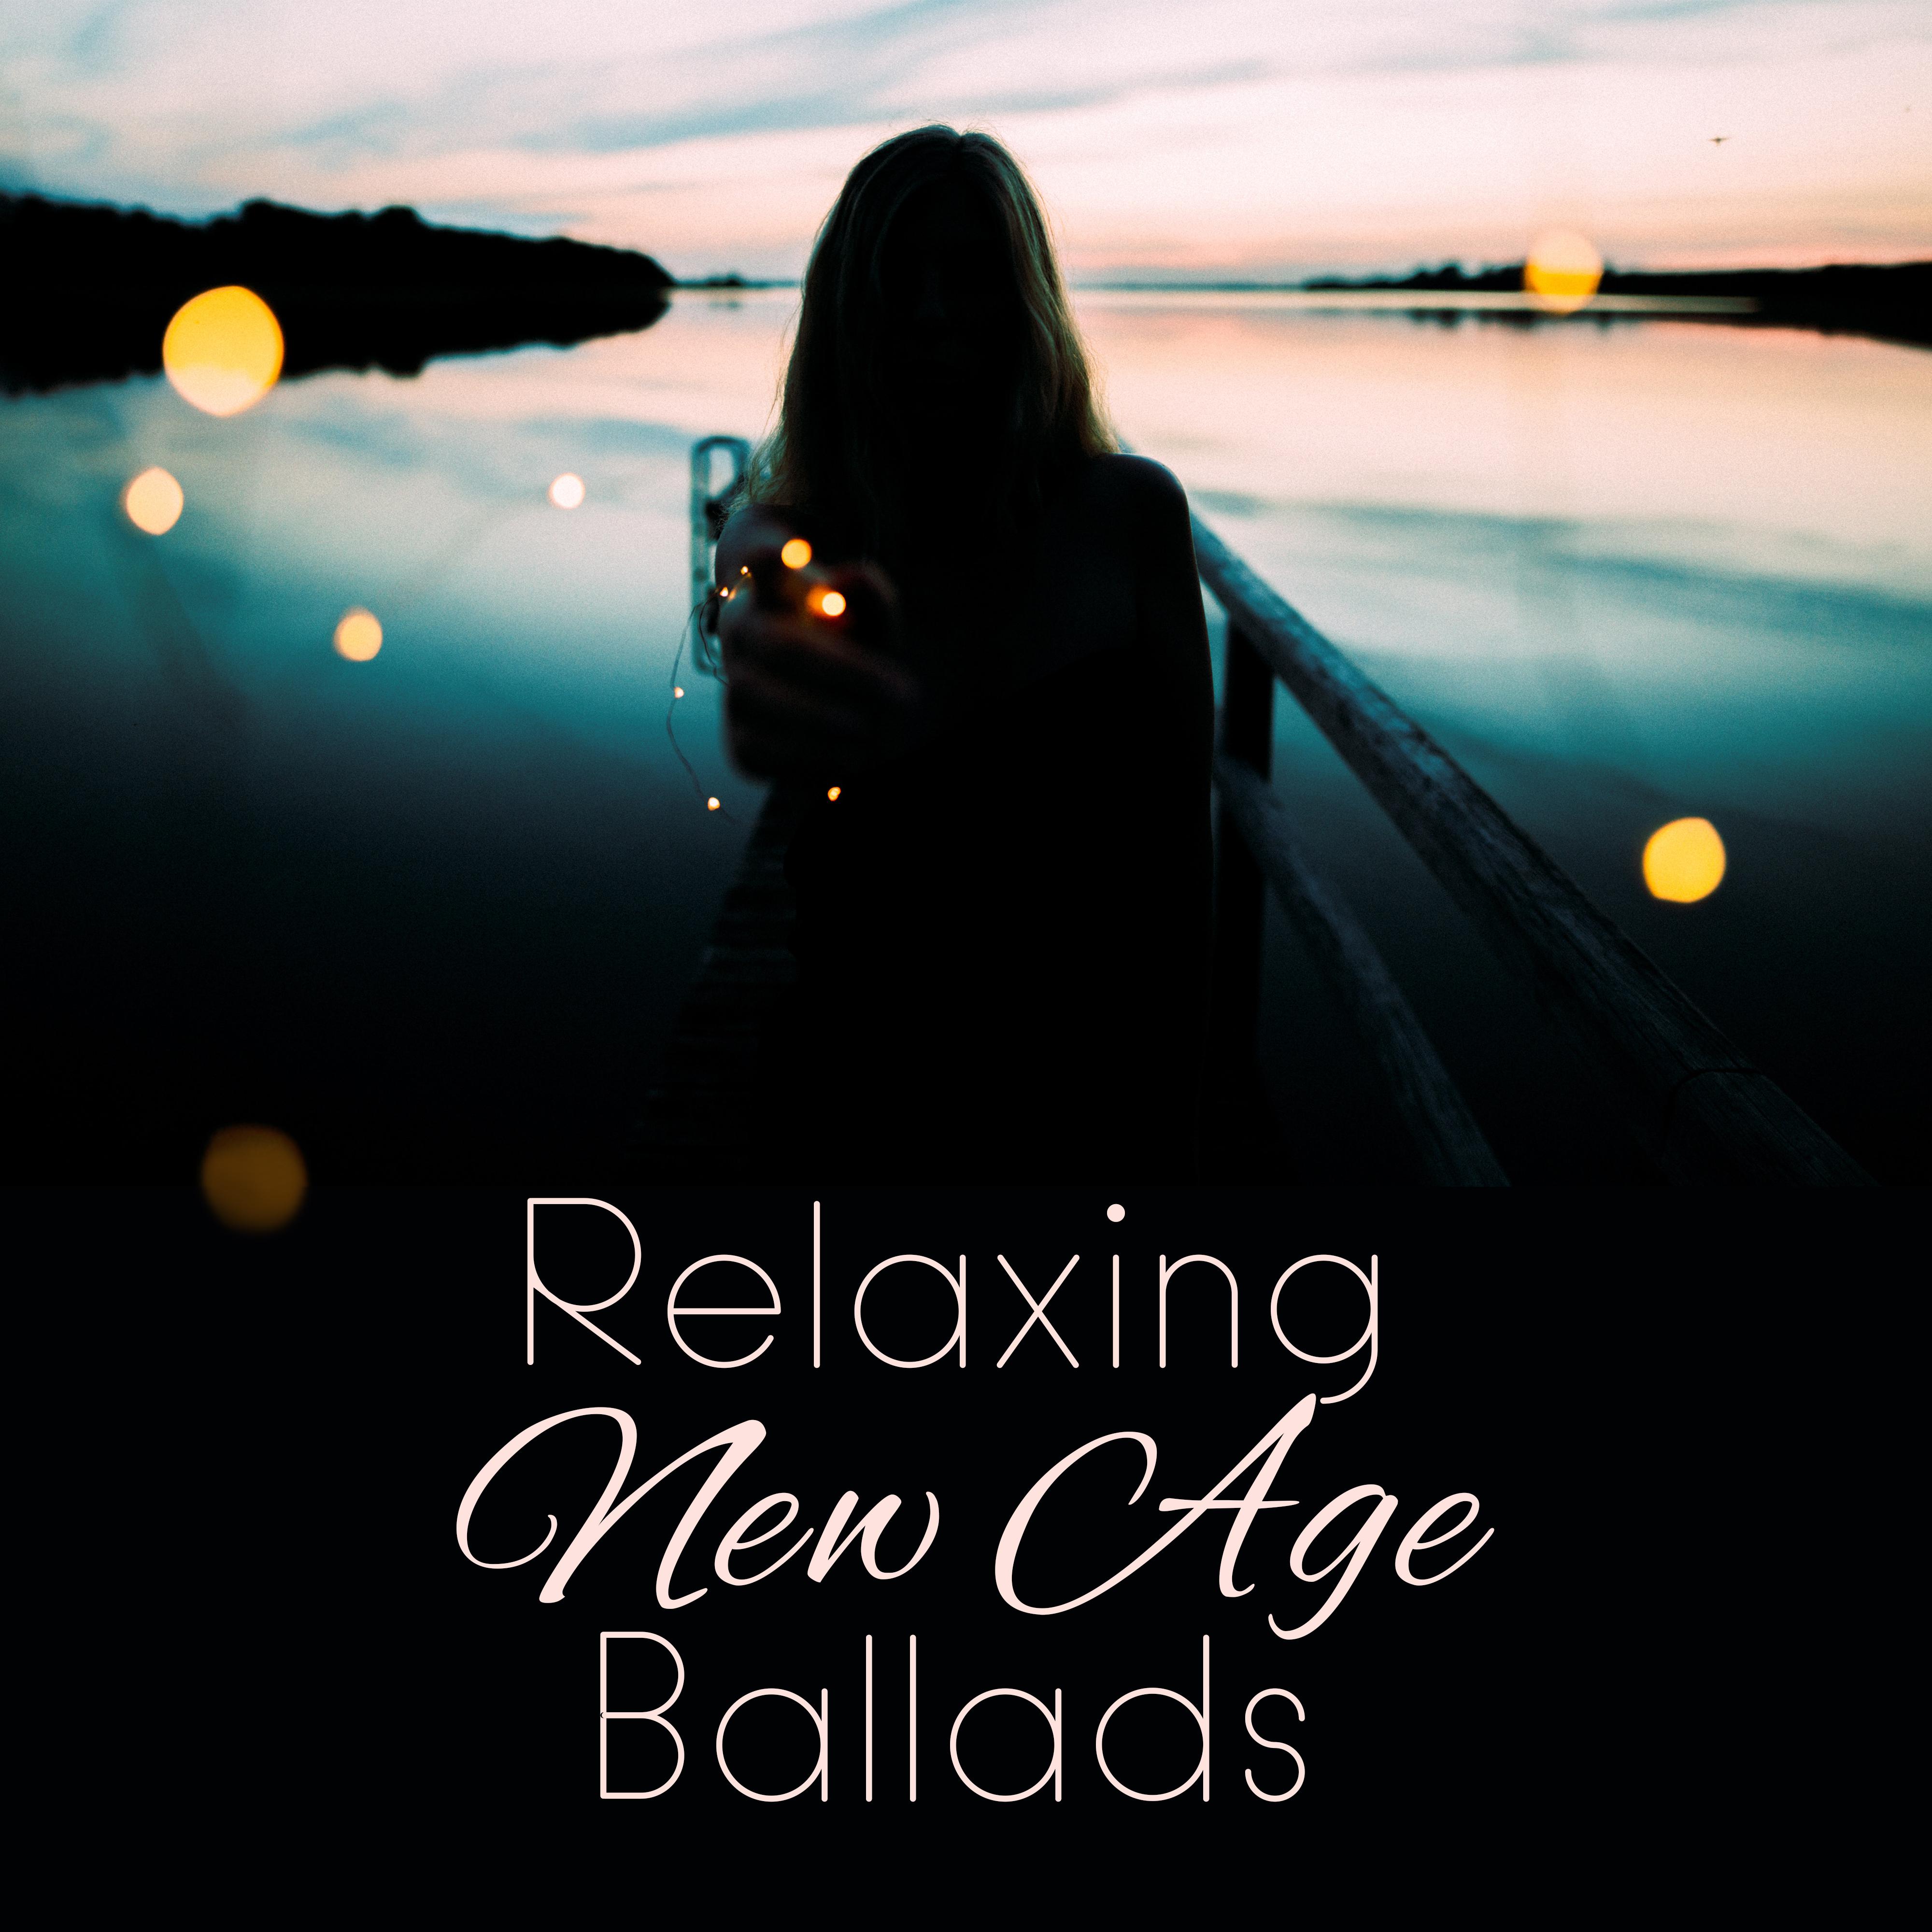 Relaxing New Age Ballads